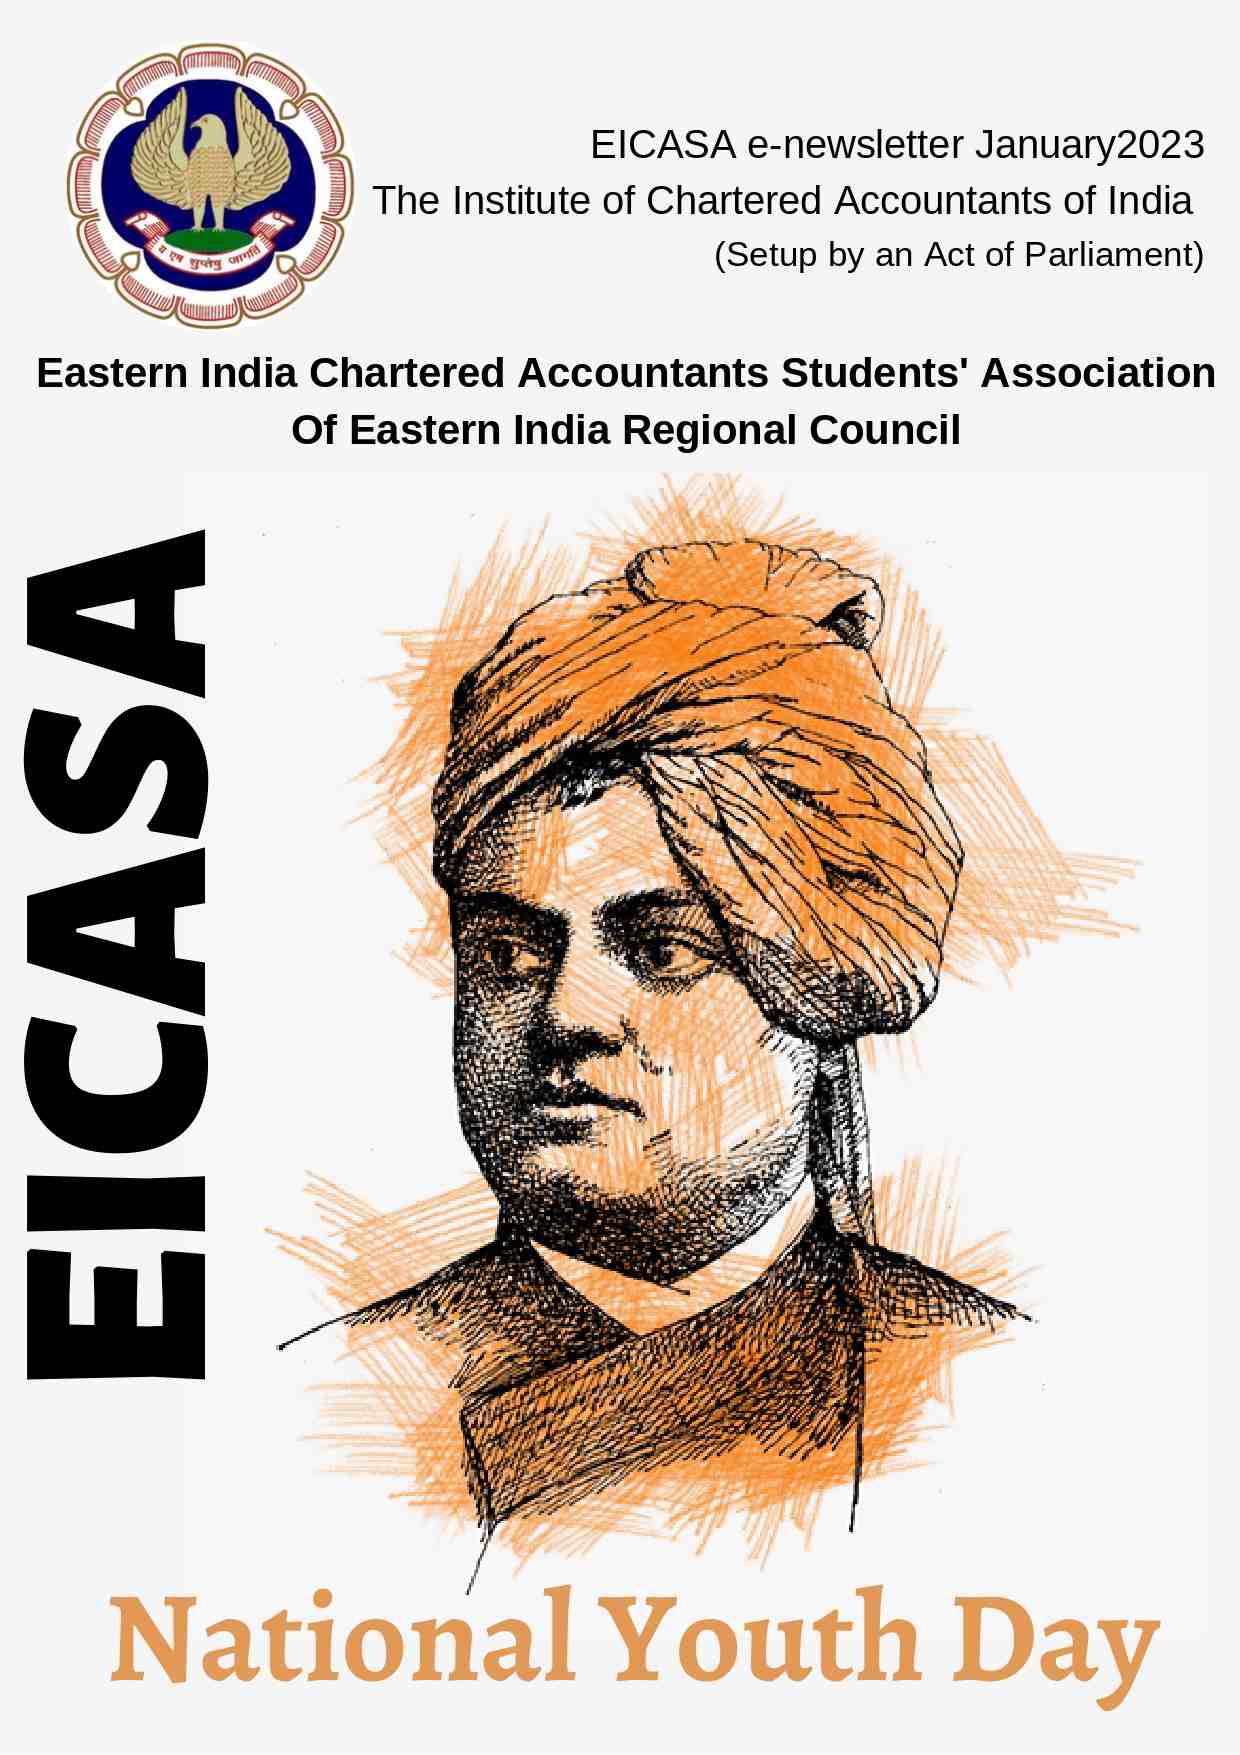 https://www.eirc-icai.org/uploads/newsletter/January_E-newsletter_2023-1Coverpage_page-0001_1681886973.jpg